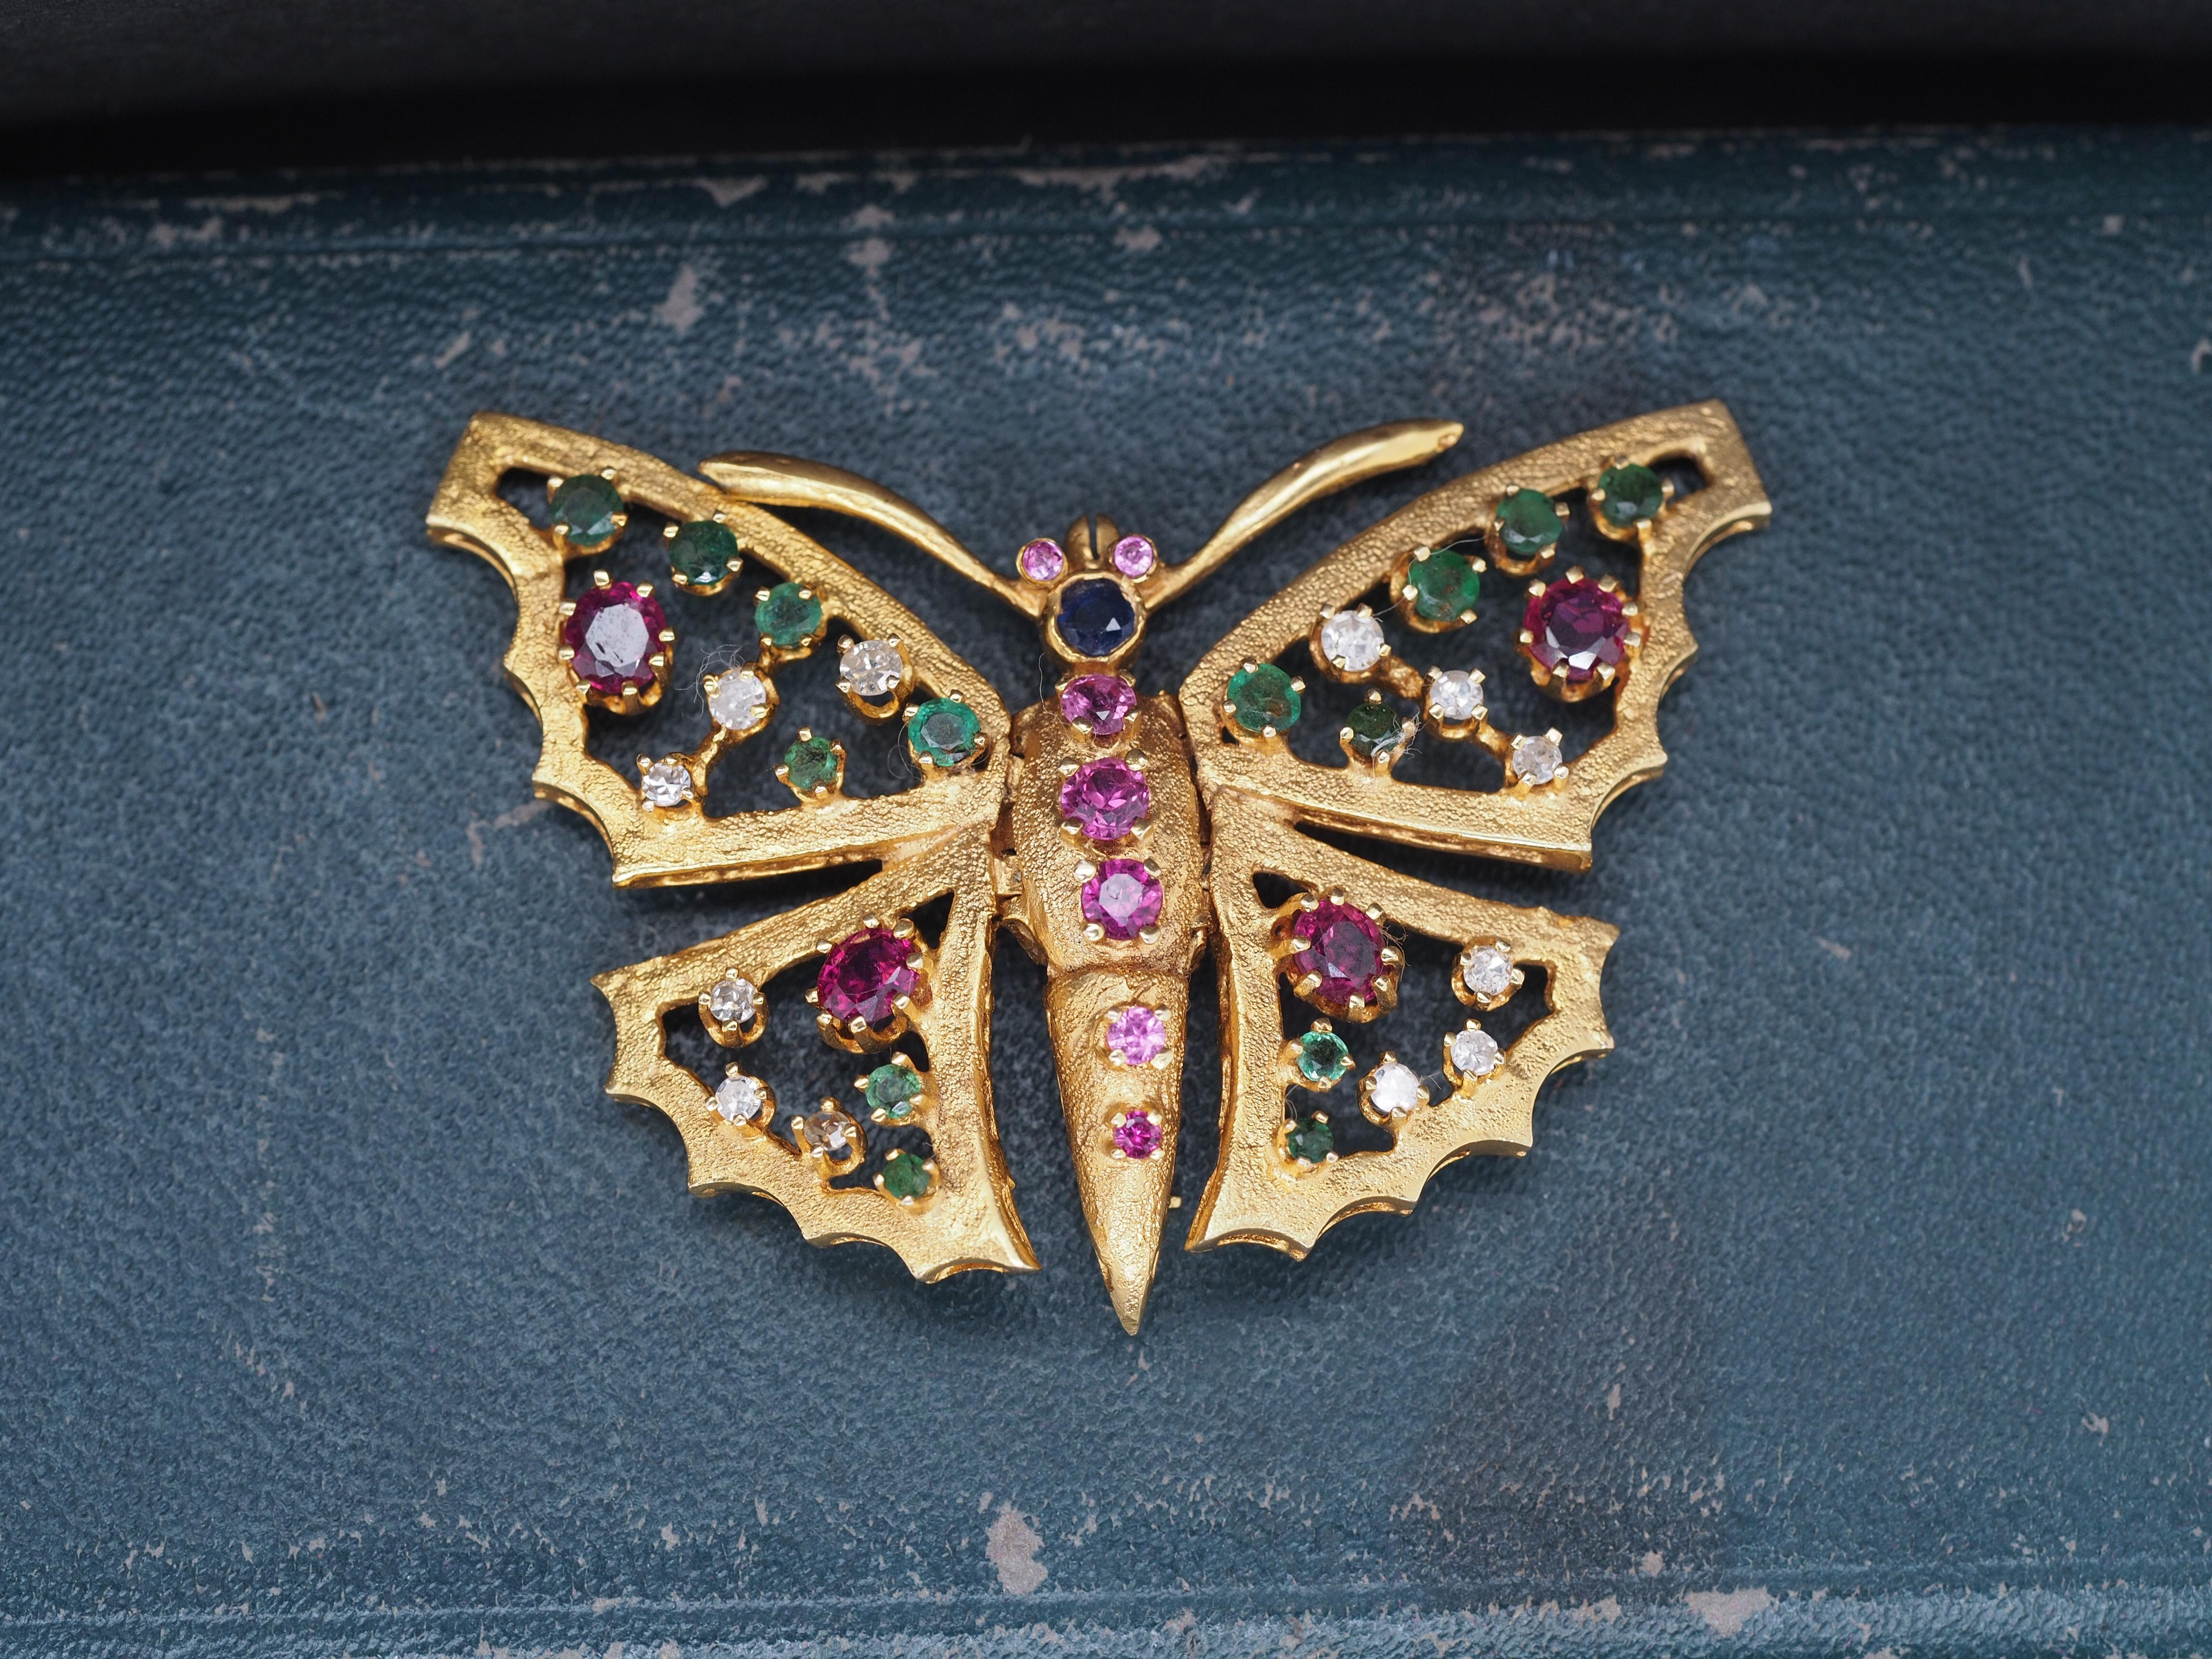 Year: 1990s
Item Details:
Metal Type: 14k yellow gold [Hallmarked, and Tested]
Weight: 13.2 grams
Color Stone Details: Rubies, Diamonds, Sapphire and Emeralds. Natural Stones, 1.25ct total weight.
Pin Measurements:
2 inch x 1.25 inch
Condition: